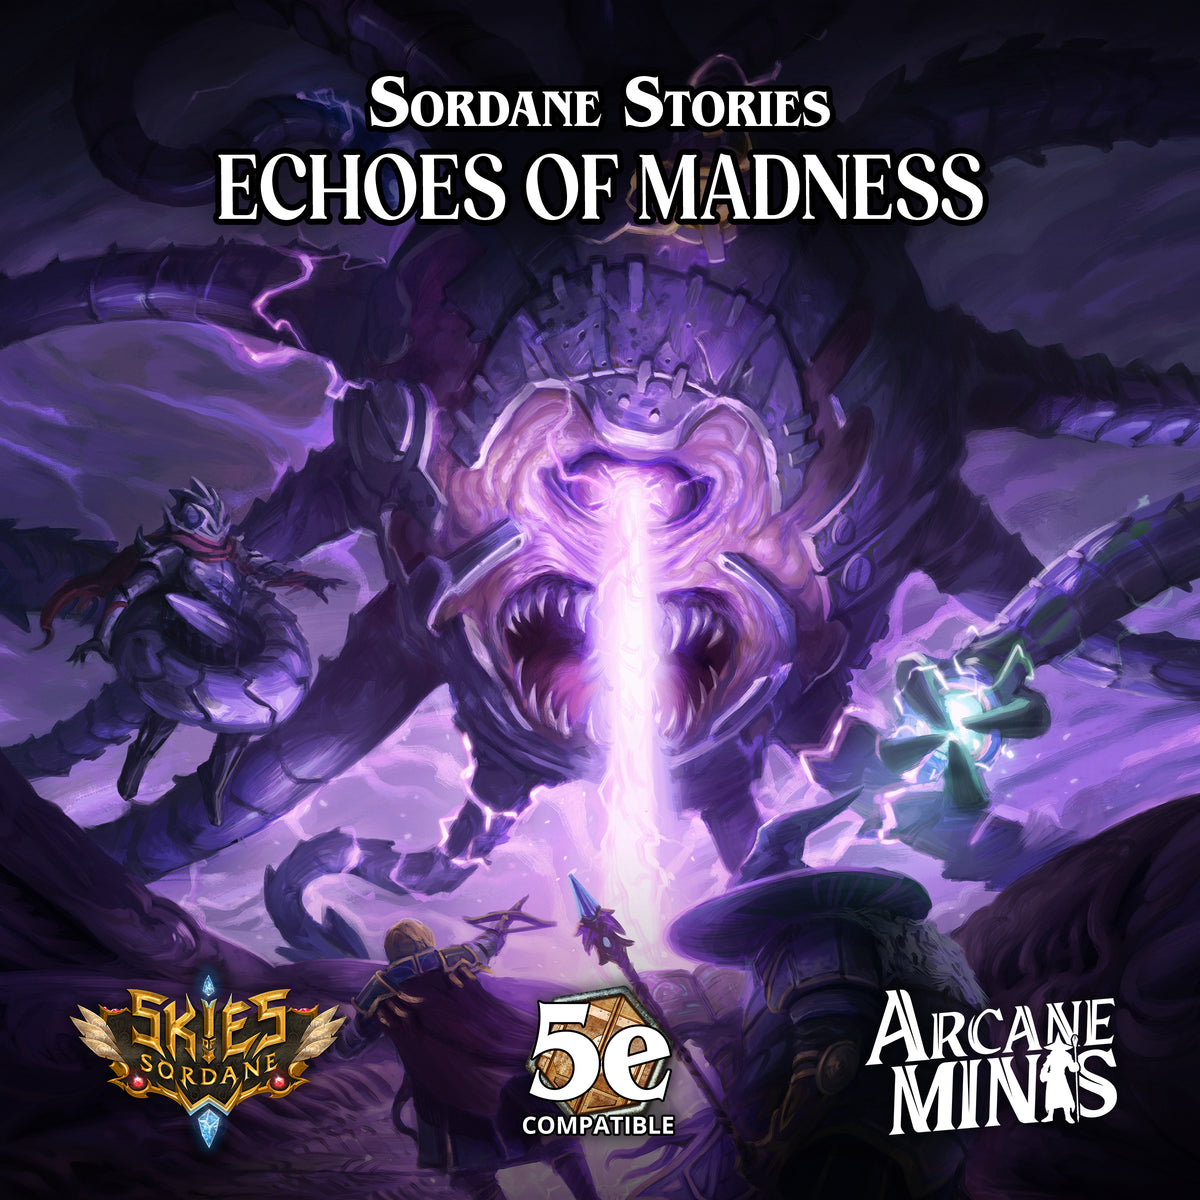 Echoes of Madness - A Sordane Stories 5e Adventure